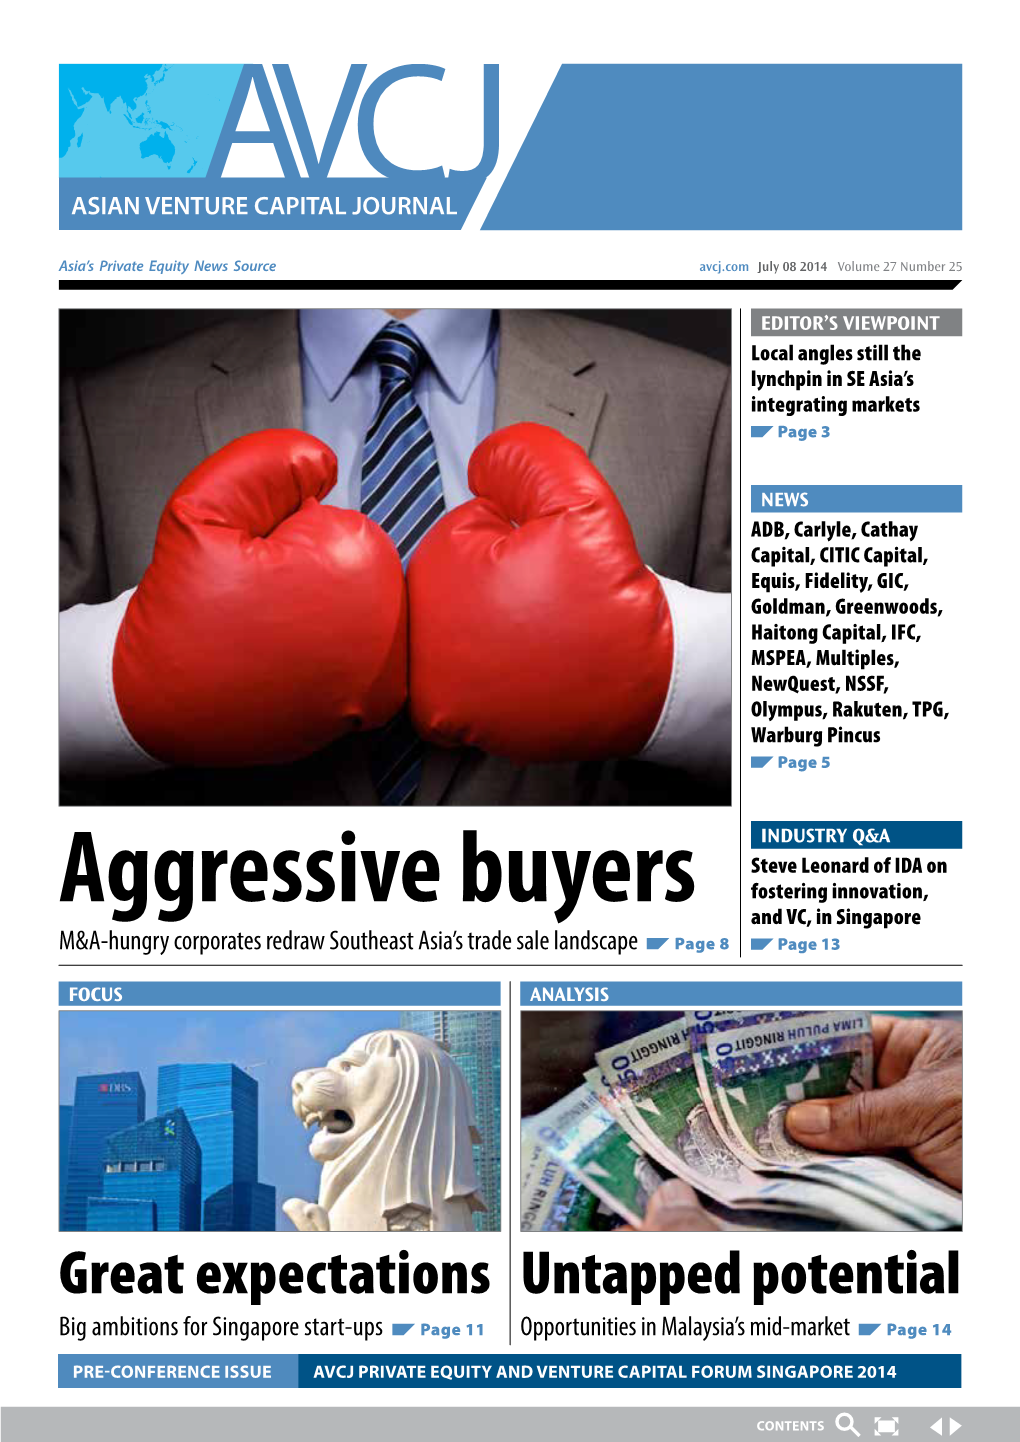 Aggressive Buyers Fostering Innovation, and VC, in Singapore M&A-Hungry Corporates Redraw Southeast Asia’S Trade Sale Landscape Page 8 Page 13